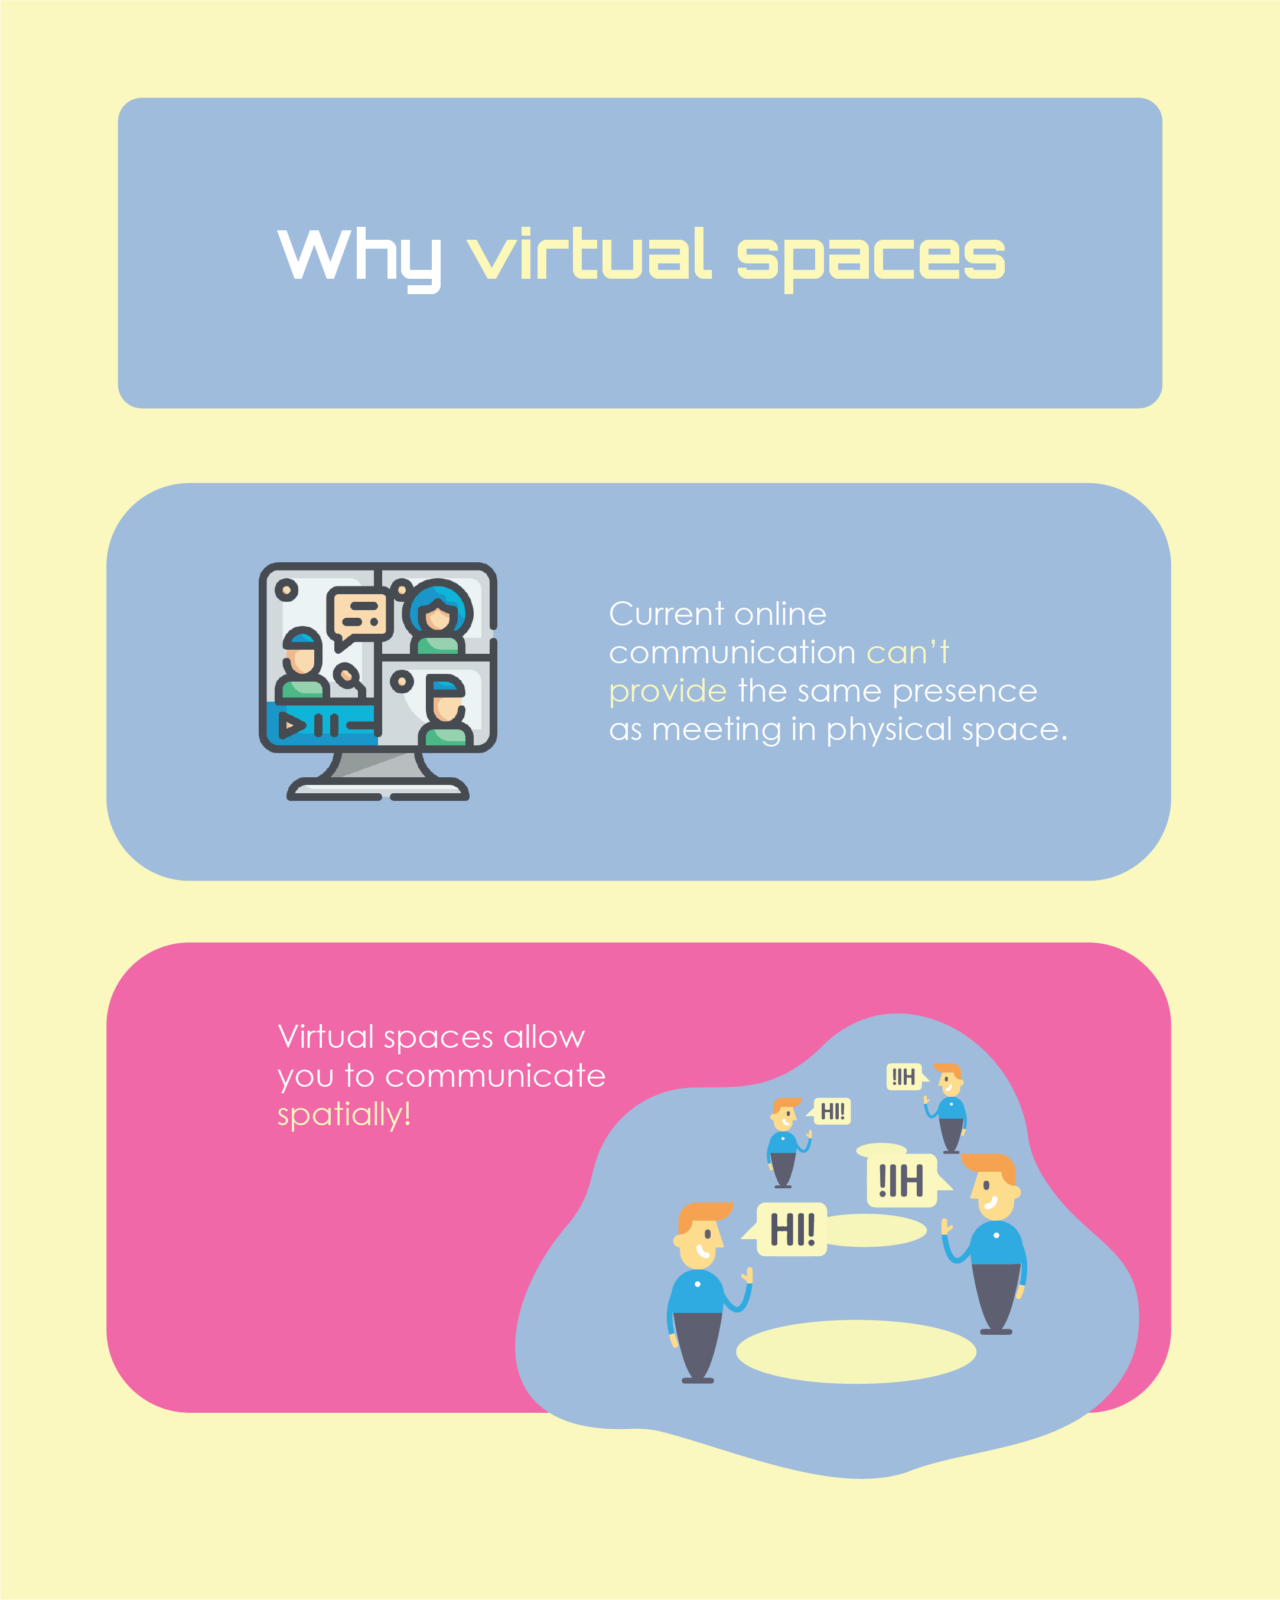 Why Virtual Spaces Poster "Current online communication can't provice the same presence as meeting in physical space."